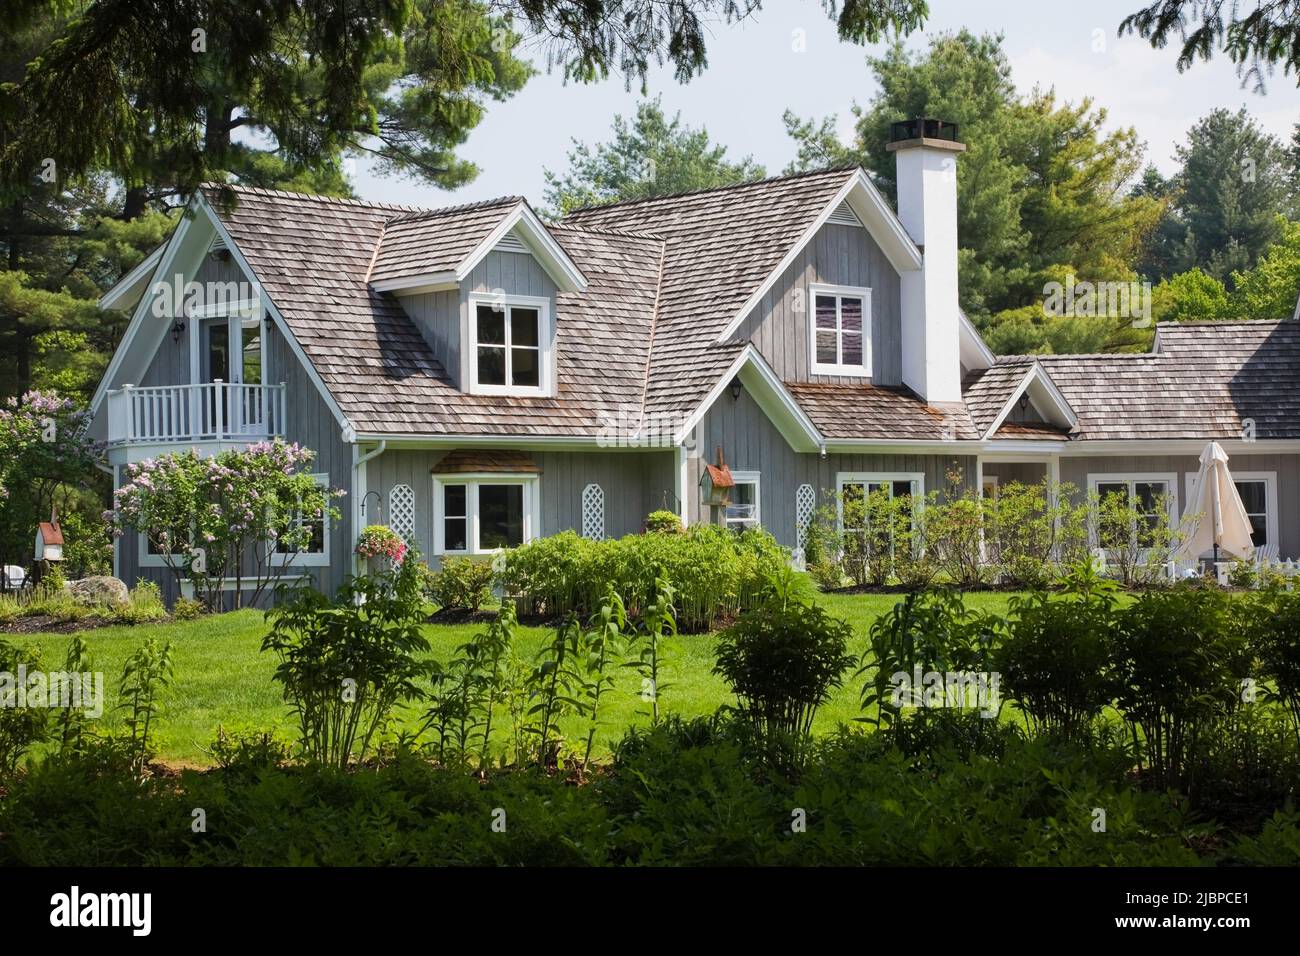 New Hampton cottage style home framed by shrubs and Pinus - Pine tree branches in spring. Stock Photo